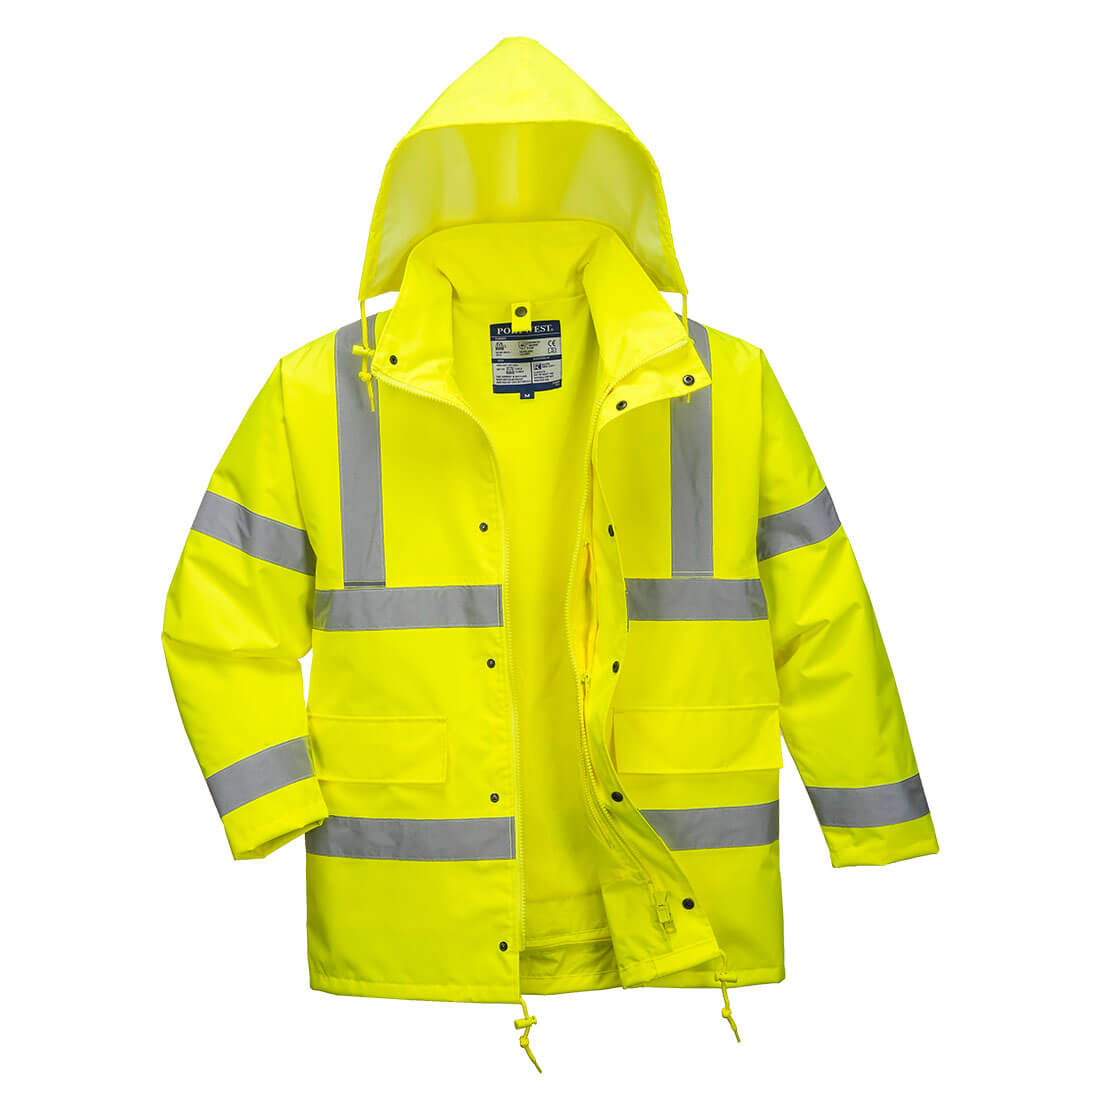 Image of Oxford Weave 300D Class 3 Hi Vis 4-in1 Traffic Jacket Yellow 3XL